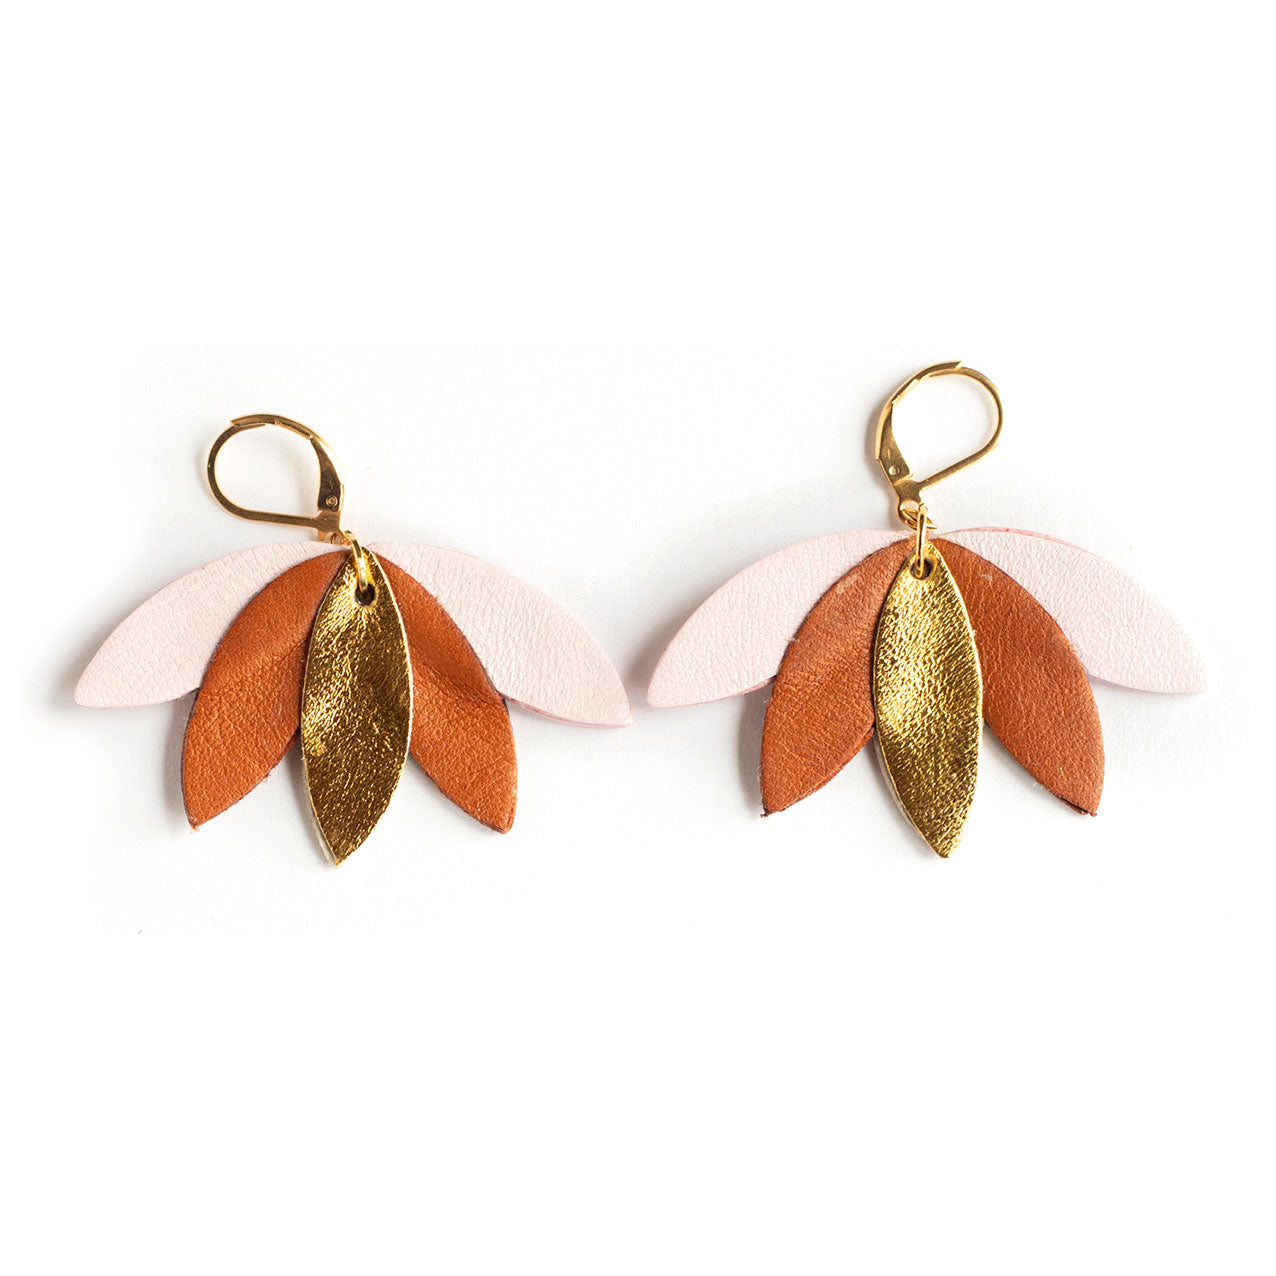 Palm tree earrings gold brown pink leather